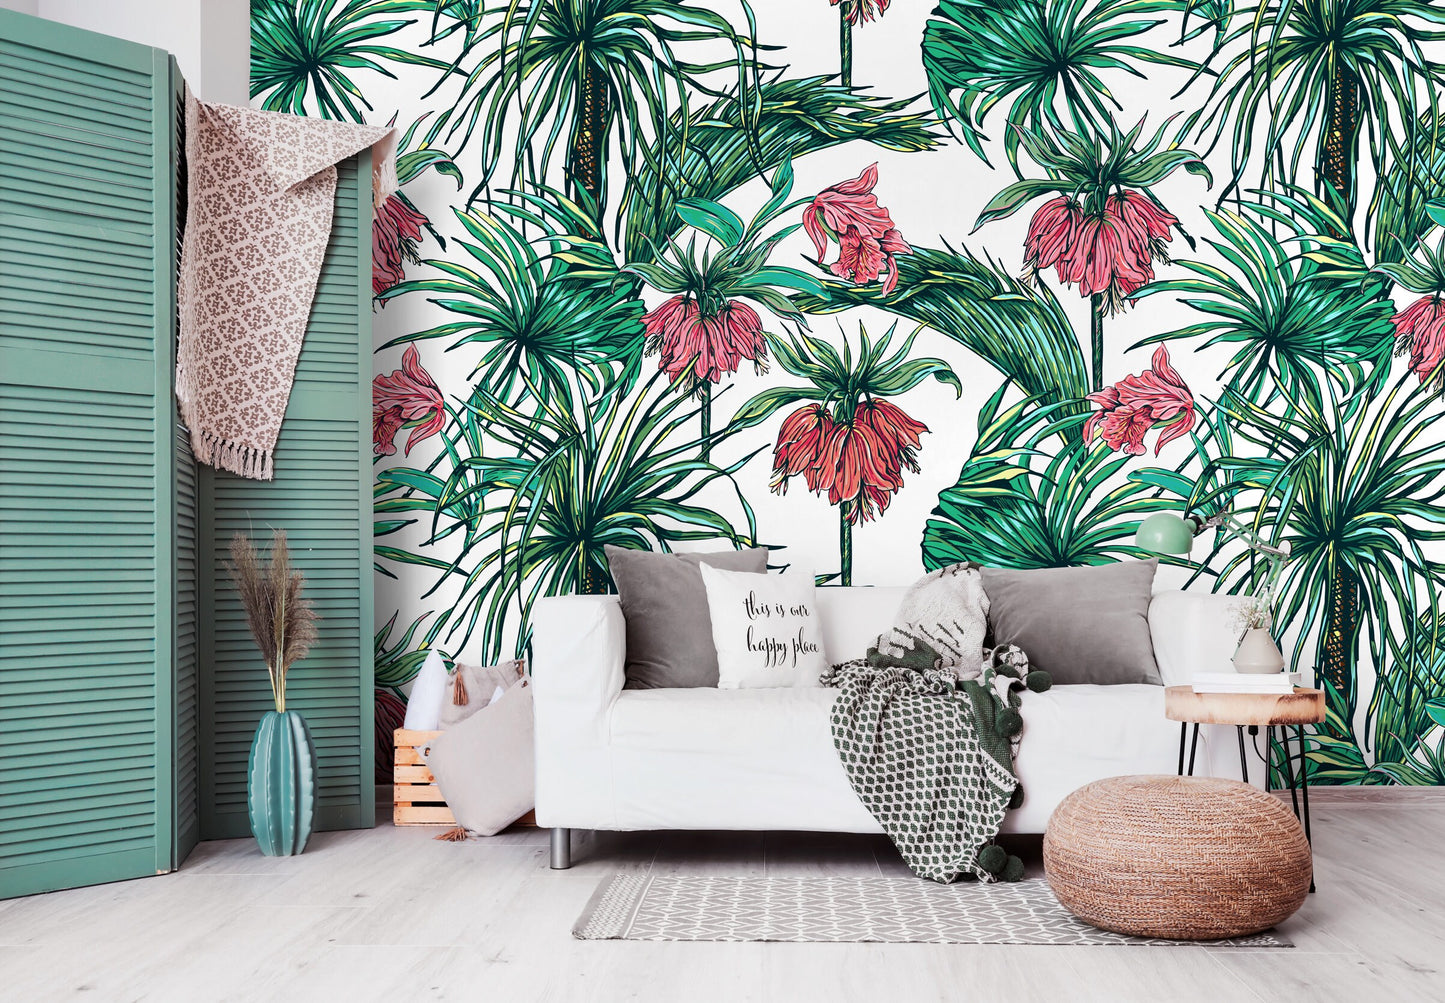 Wallpaper Peel and Stick Wallpaper Removable Wallpaper Home Decor Wall Art Wall Decor Room Decor / Green and Red Tropical Wallpaper - B114